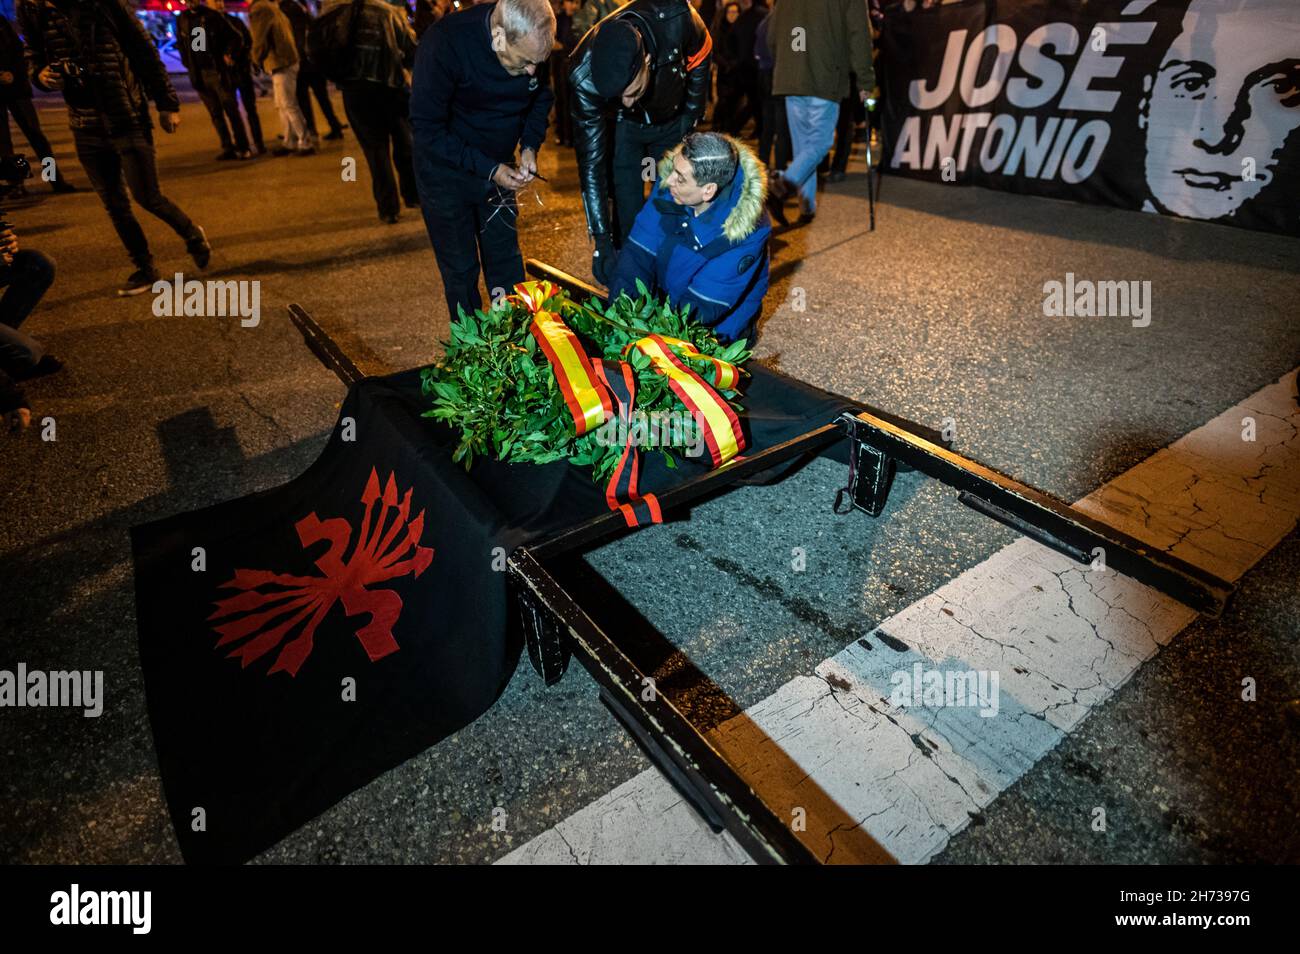 Madrid, Spain. 19th Nov, 2021. Far right wing members and supporters of La Falange preparing a crown during a demonstration for the anniversary of the death of Jose Antonio Primo de Rivera, founder of La Falange, commemorating the 85th anniversary of his death on 20 November 1936, shot at the beginning of the Spanish Civil War. Credit: Marcos del Mazo/Alamy Live News Stock Photo